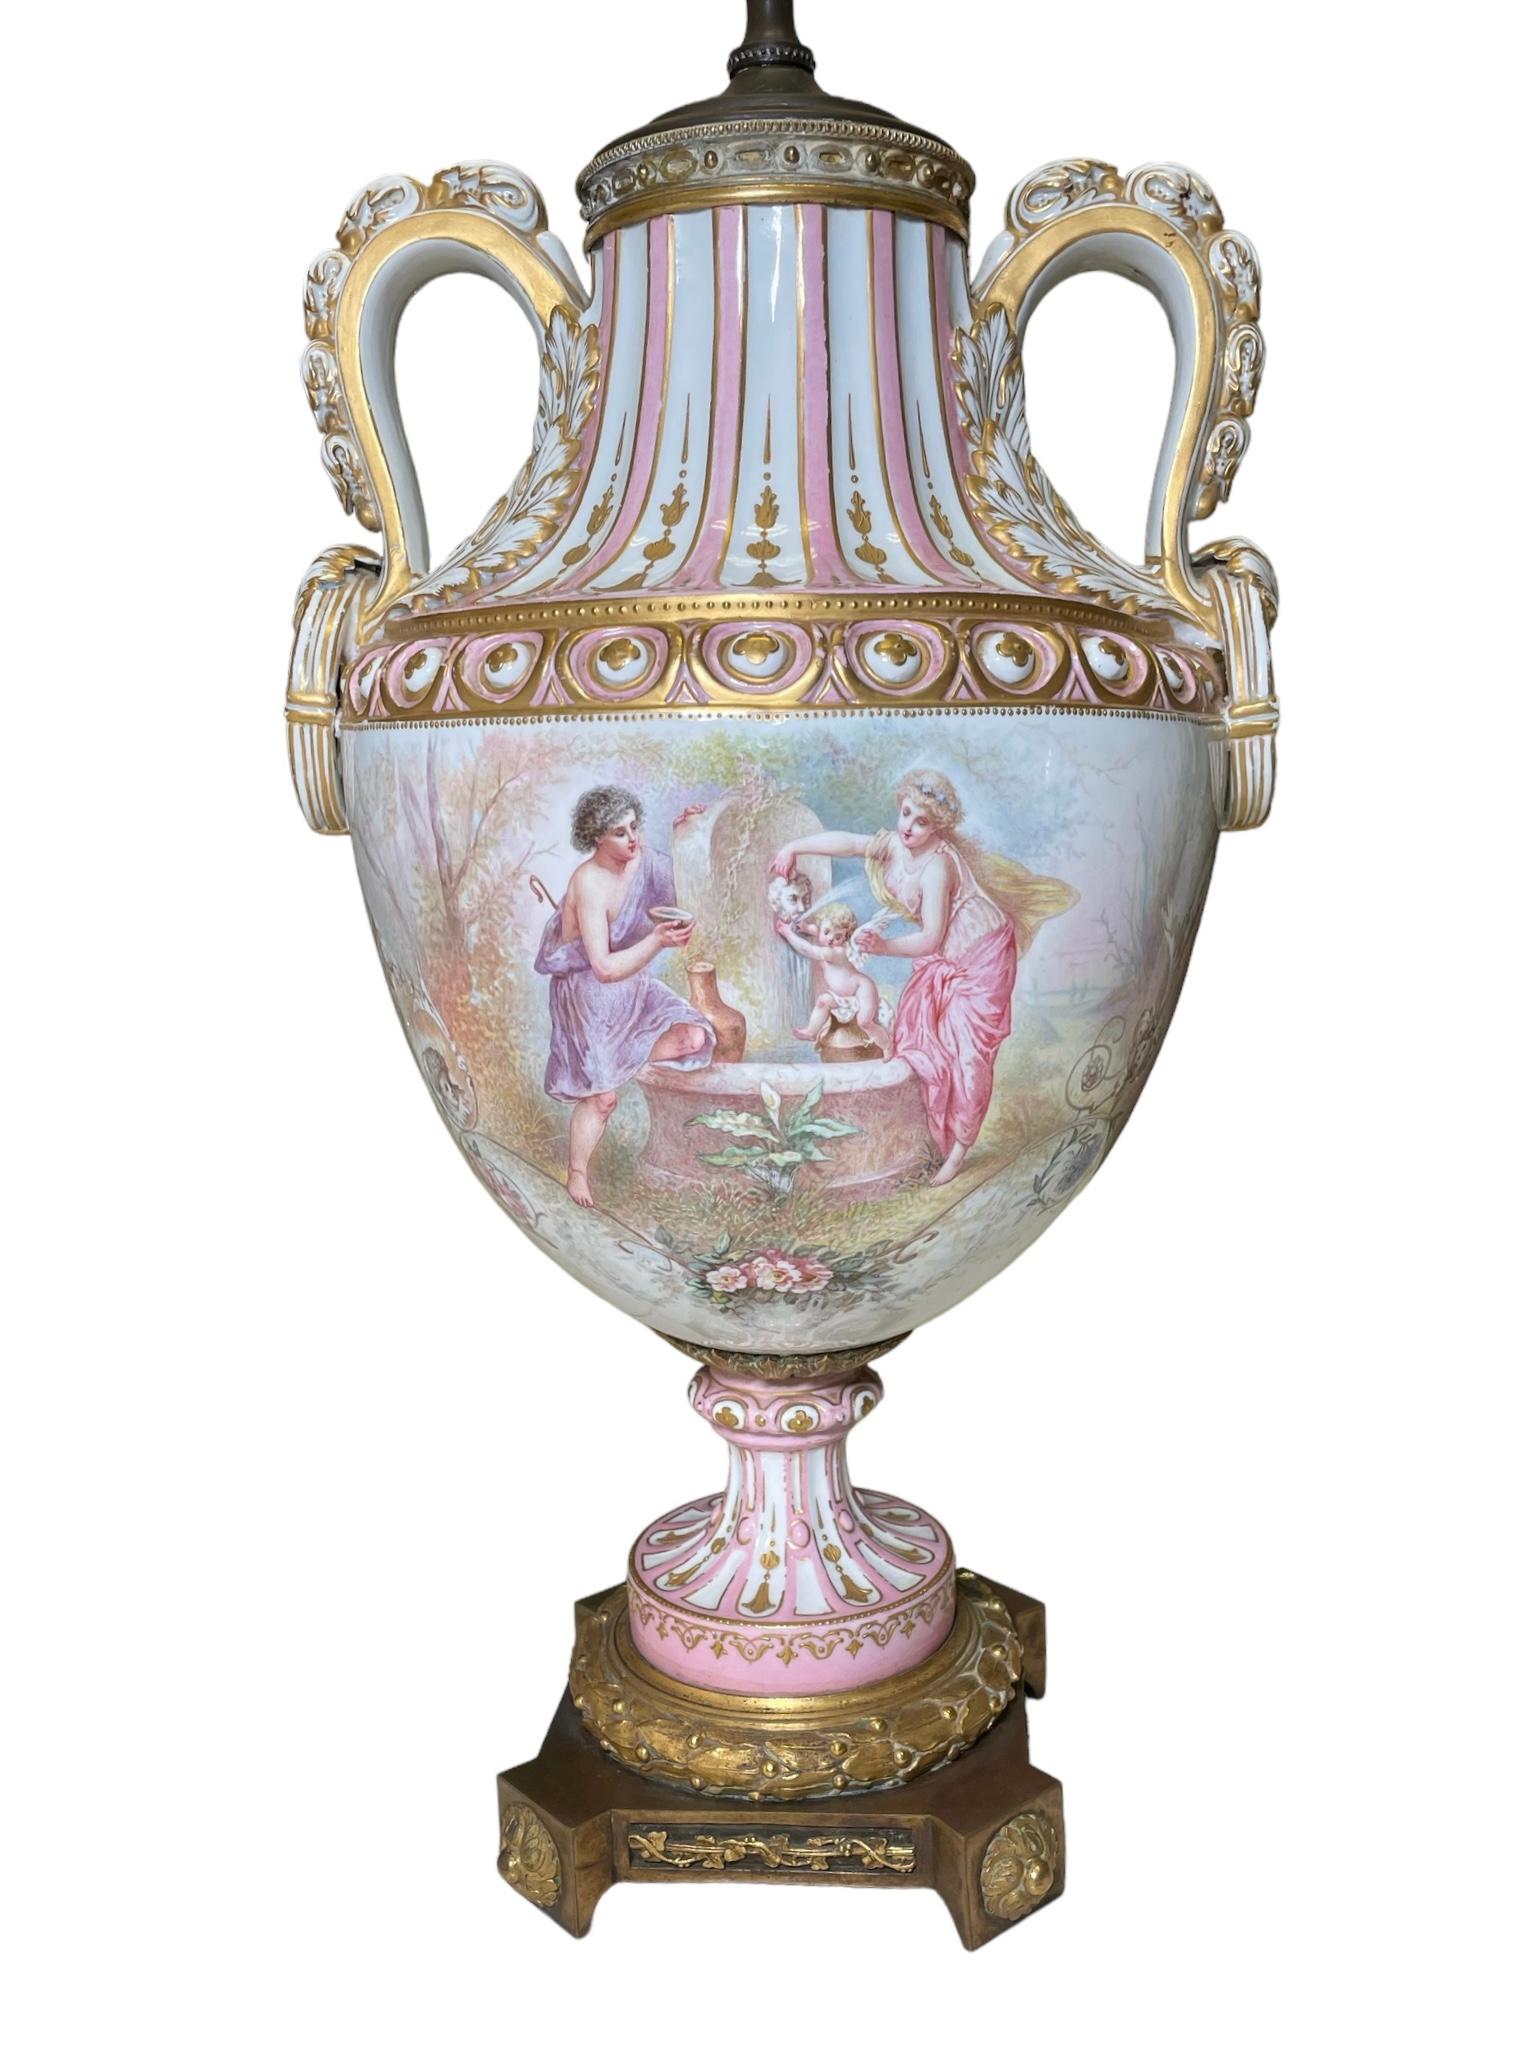 This is a Sevres Style porcelain large bronze mounted urn table lamp. It depicts an urn hand painted pink and white in the background with winged cherubs around the center. Its ear shaped handles are decorated with gilt white scrolls of acanthus